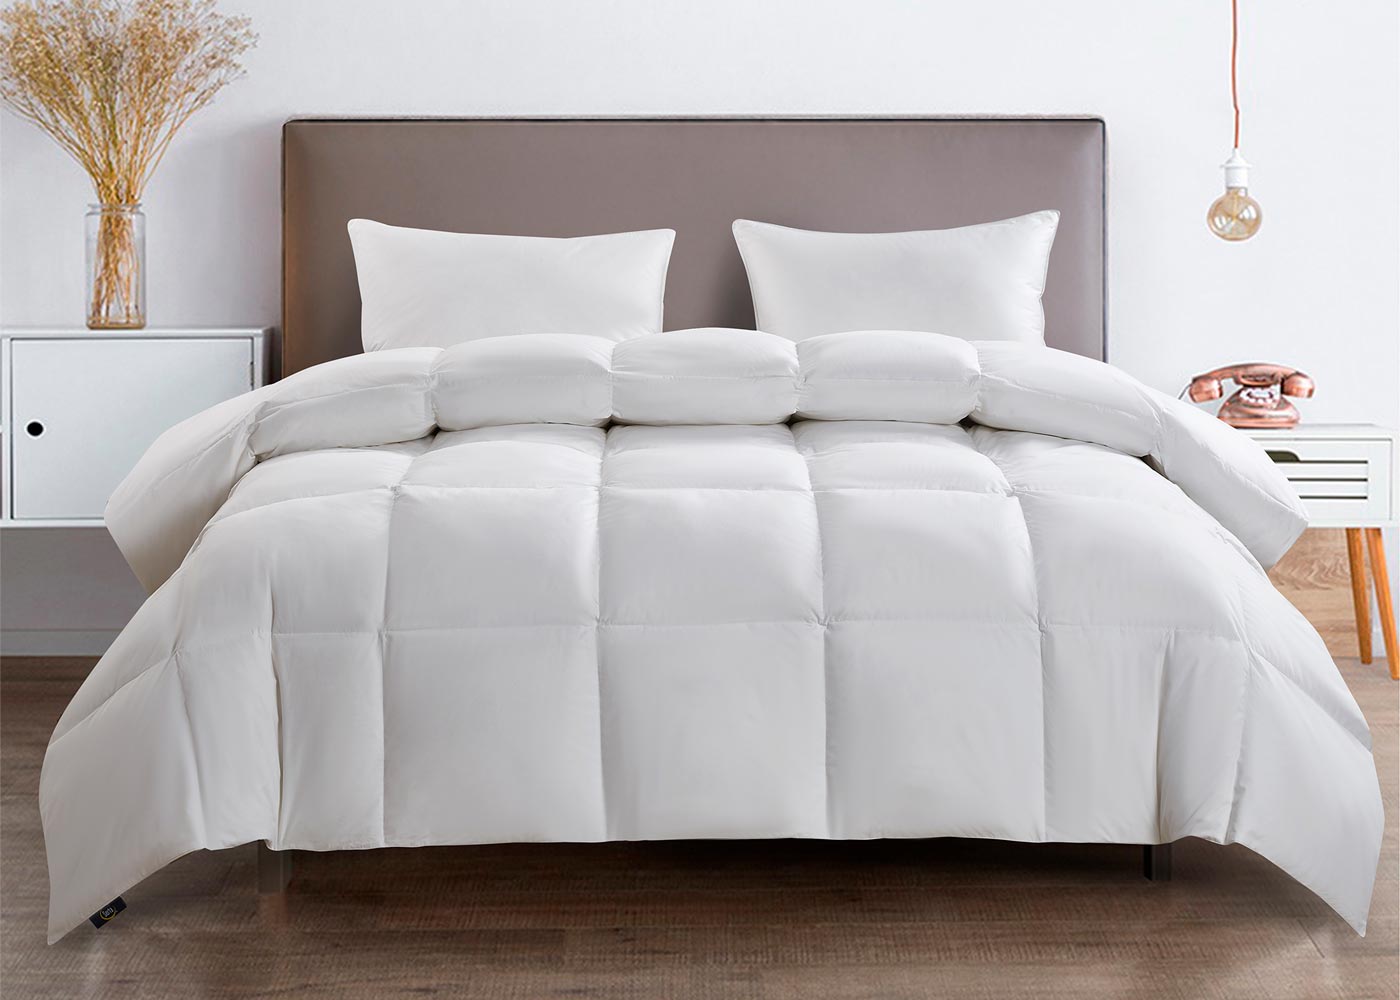 Extra Warmth White Goose Feather and Down Fiber Comforter by Serta